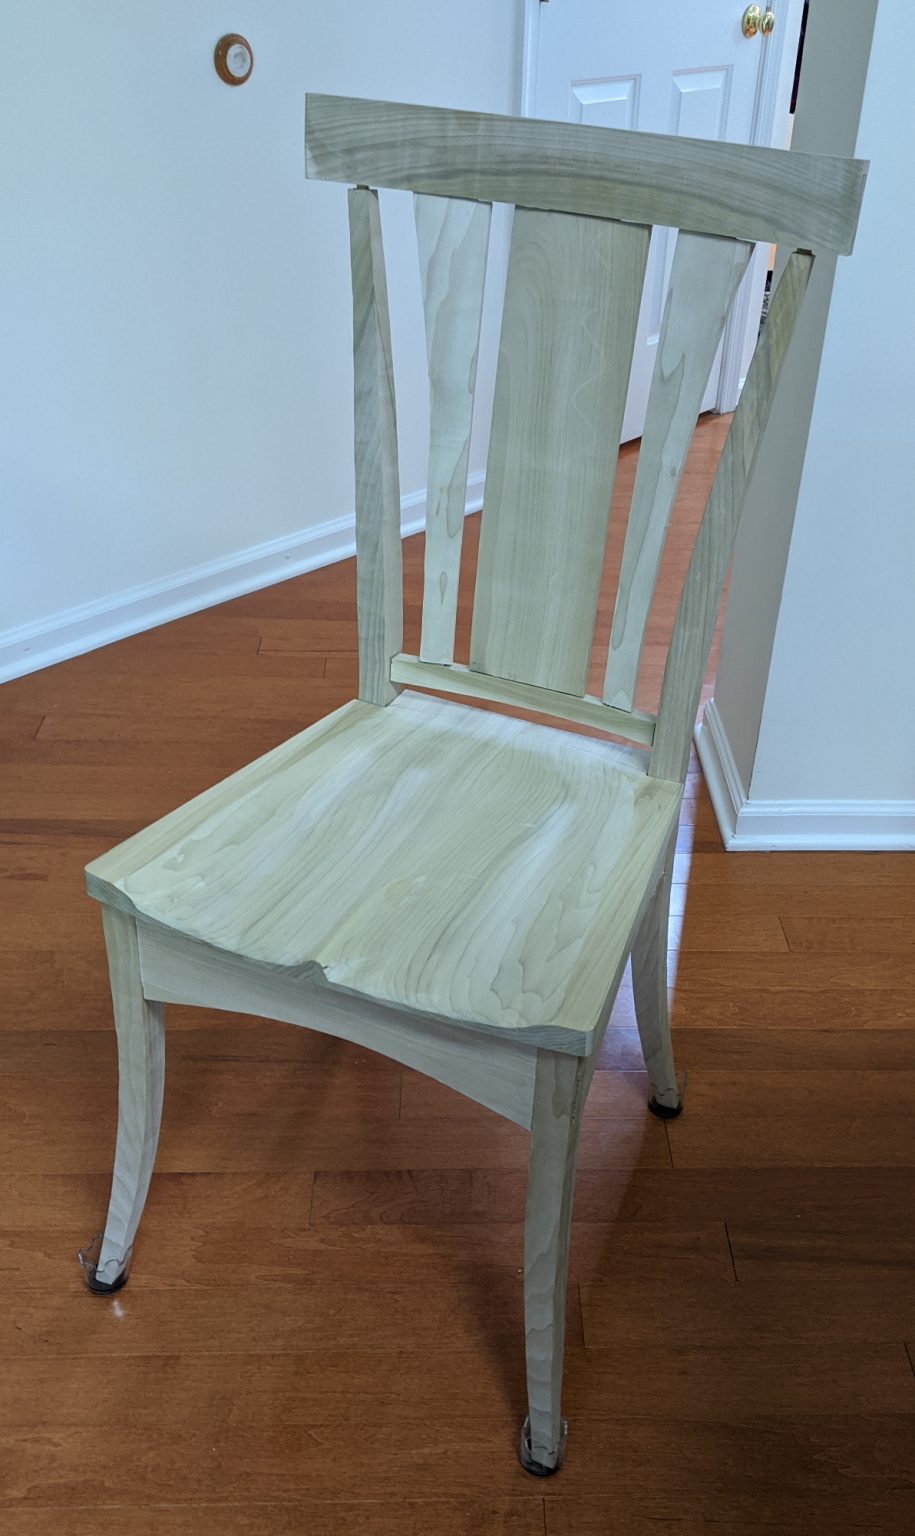 The First Chair | Diary of a Wood Nerd